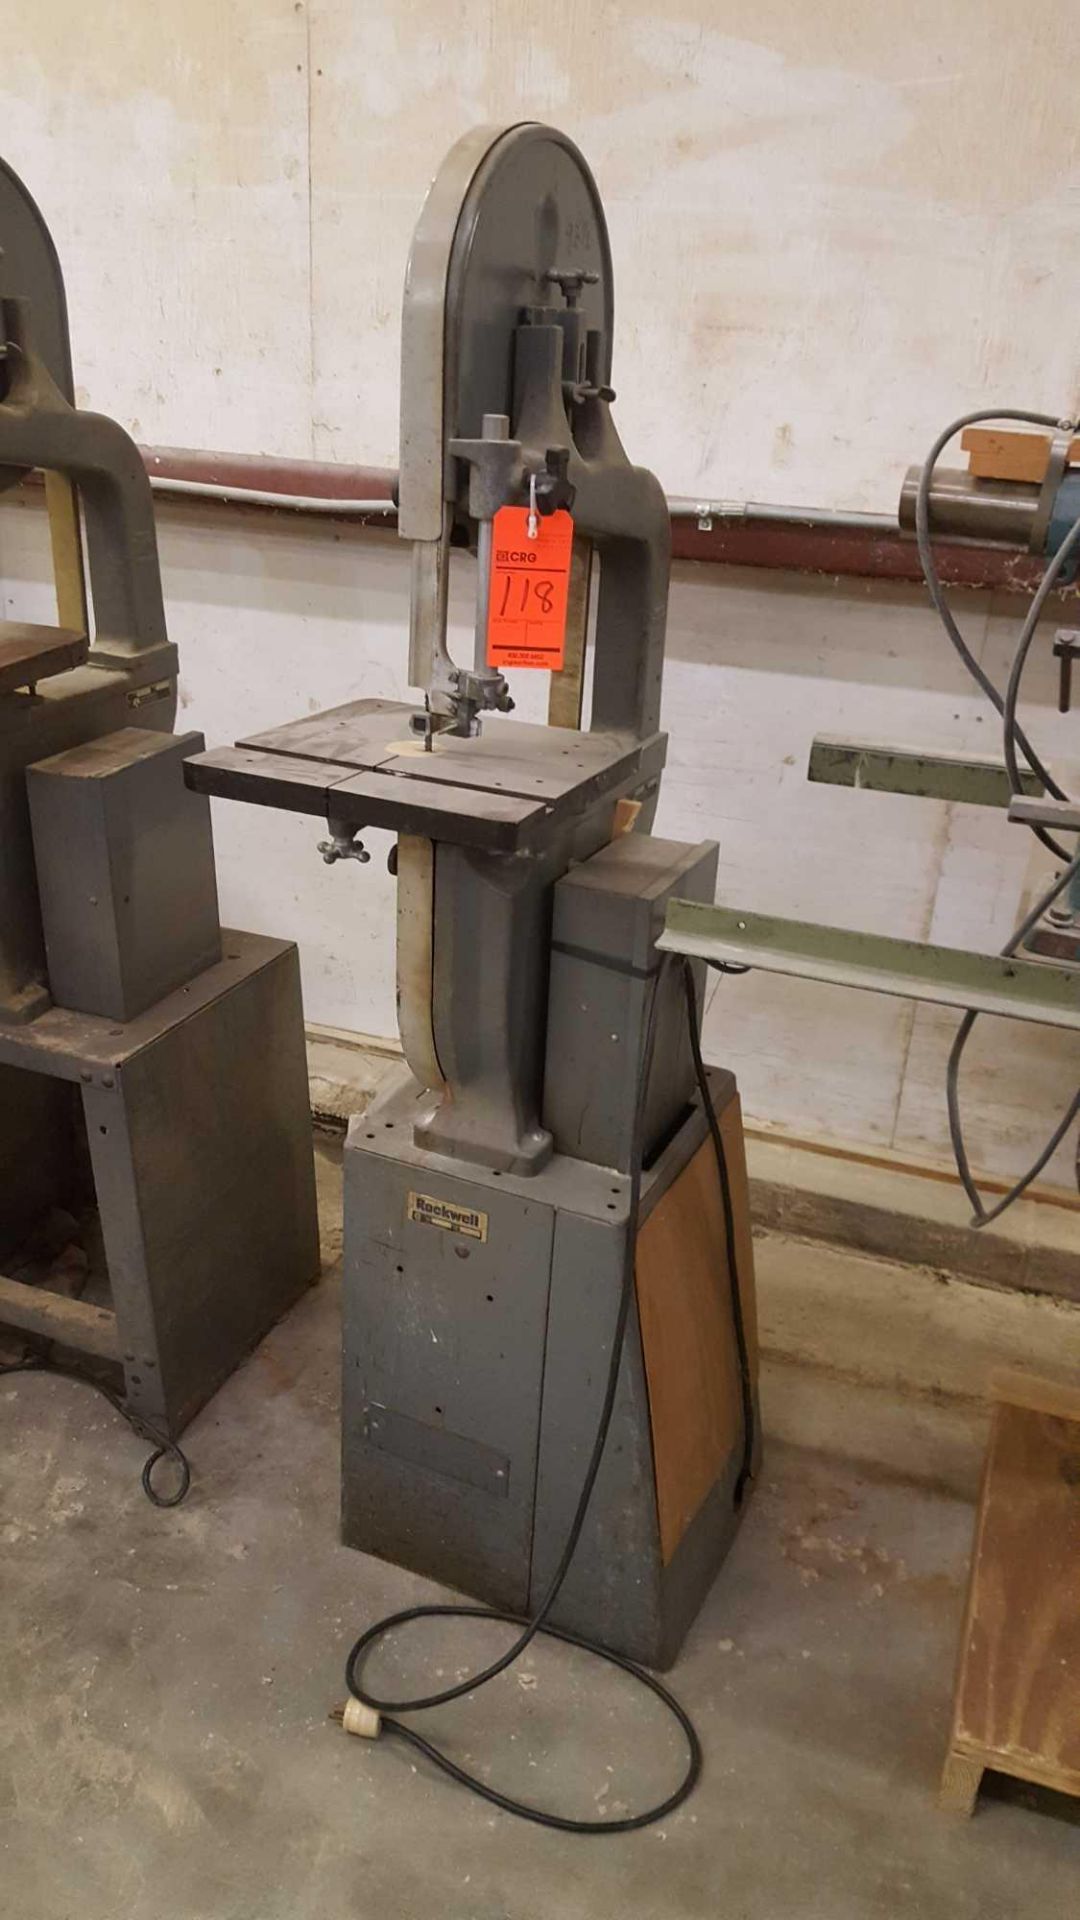 Rockwell 14 inch vertical bandsaw, number 1057, single phase